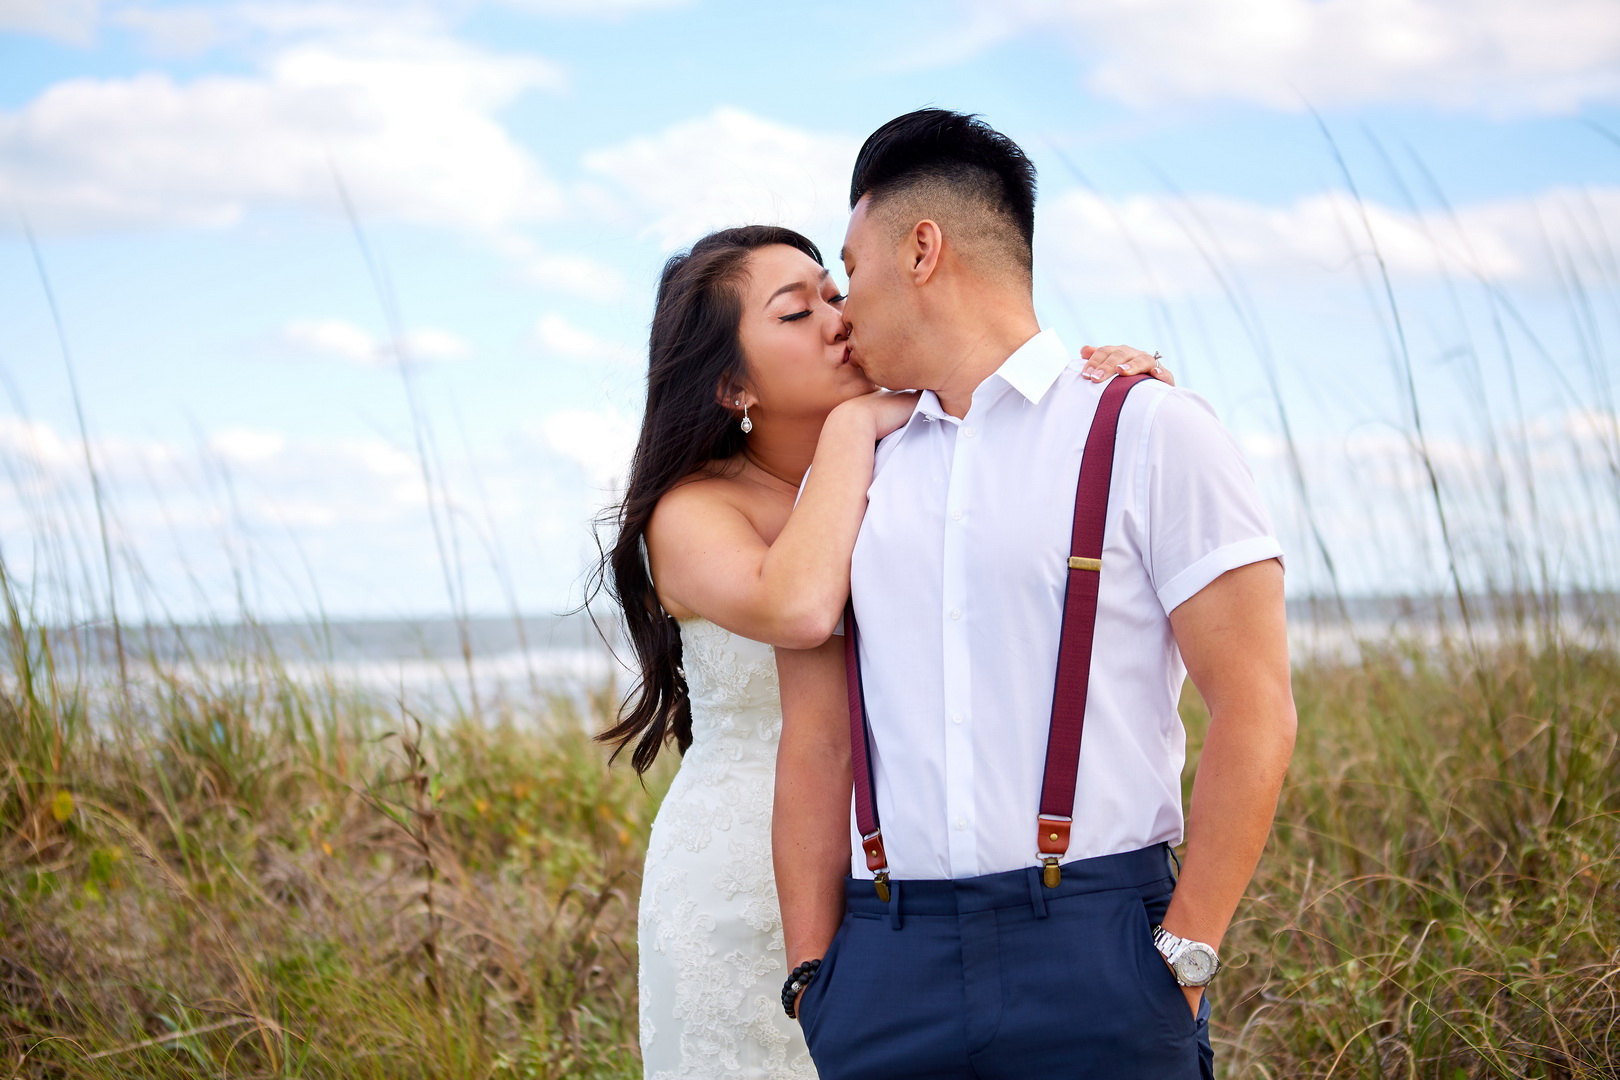 Bride kissing groom over his shoulder on beach grass in Isle of Palms, SC.